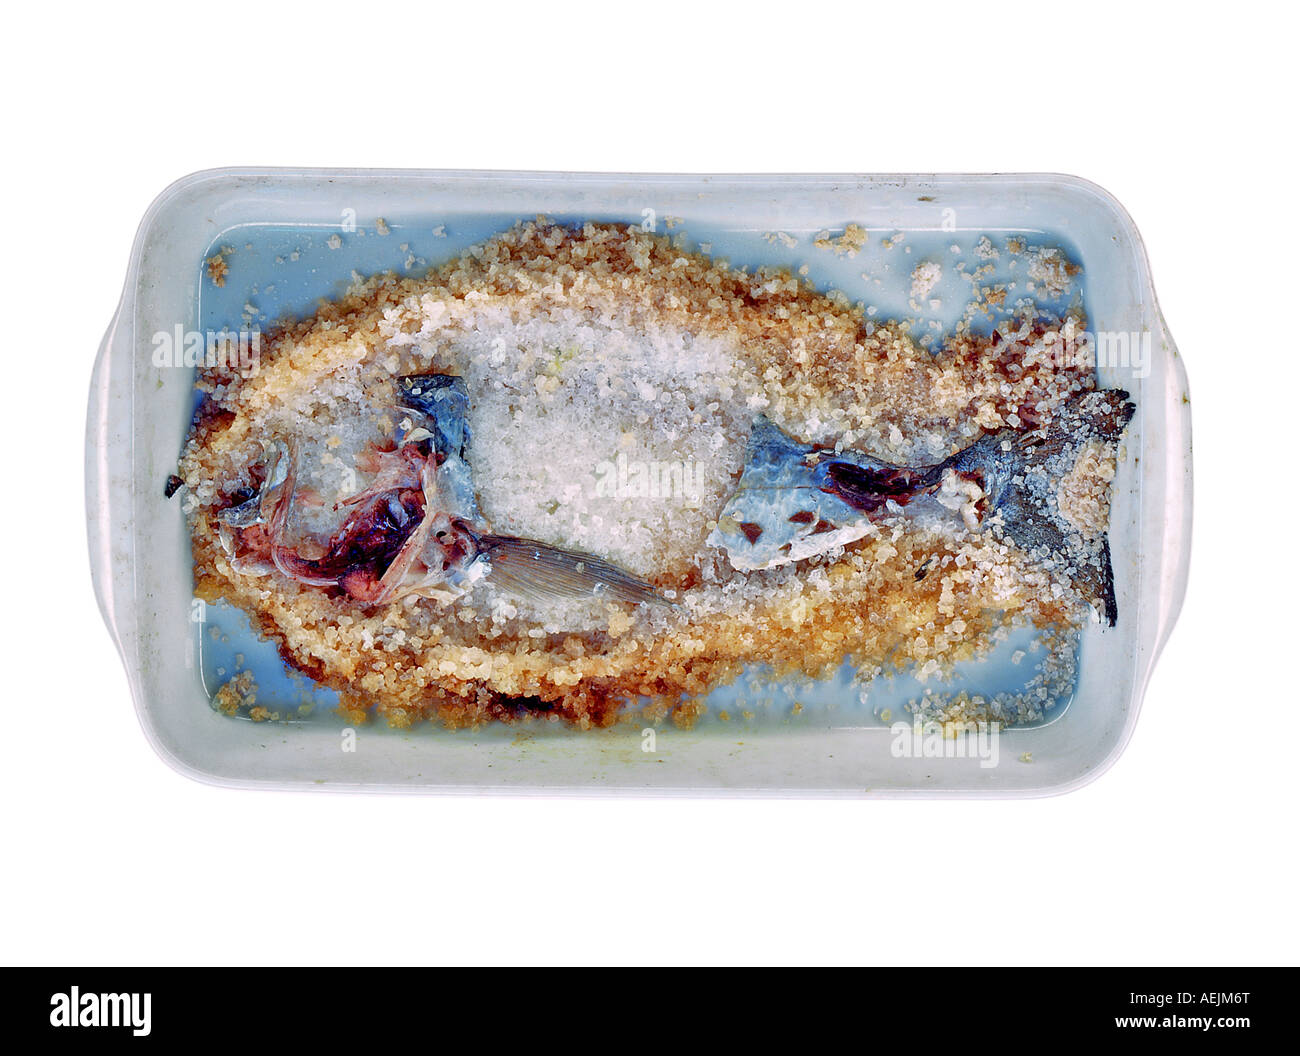 Leftovers, salty crusted fish on a china plate Stock Photo